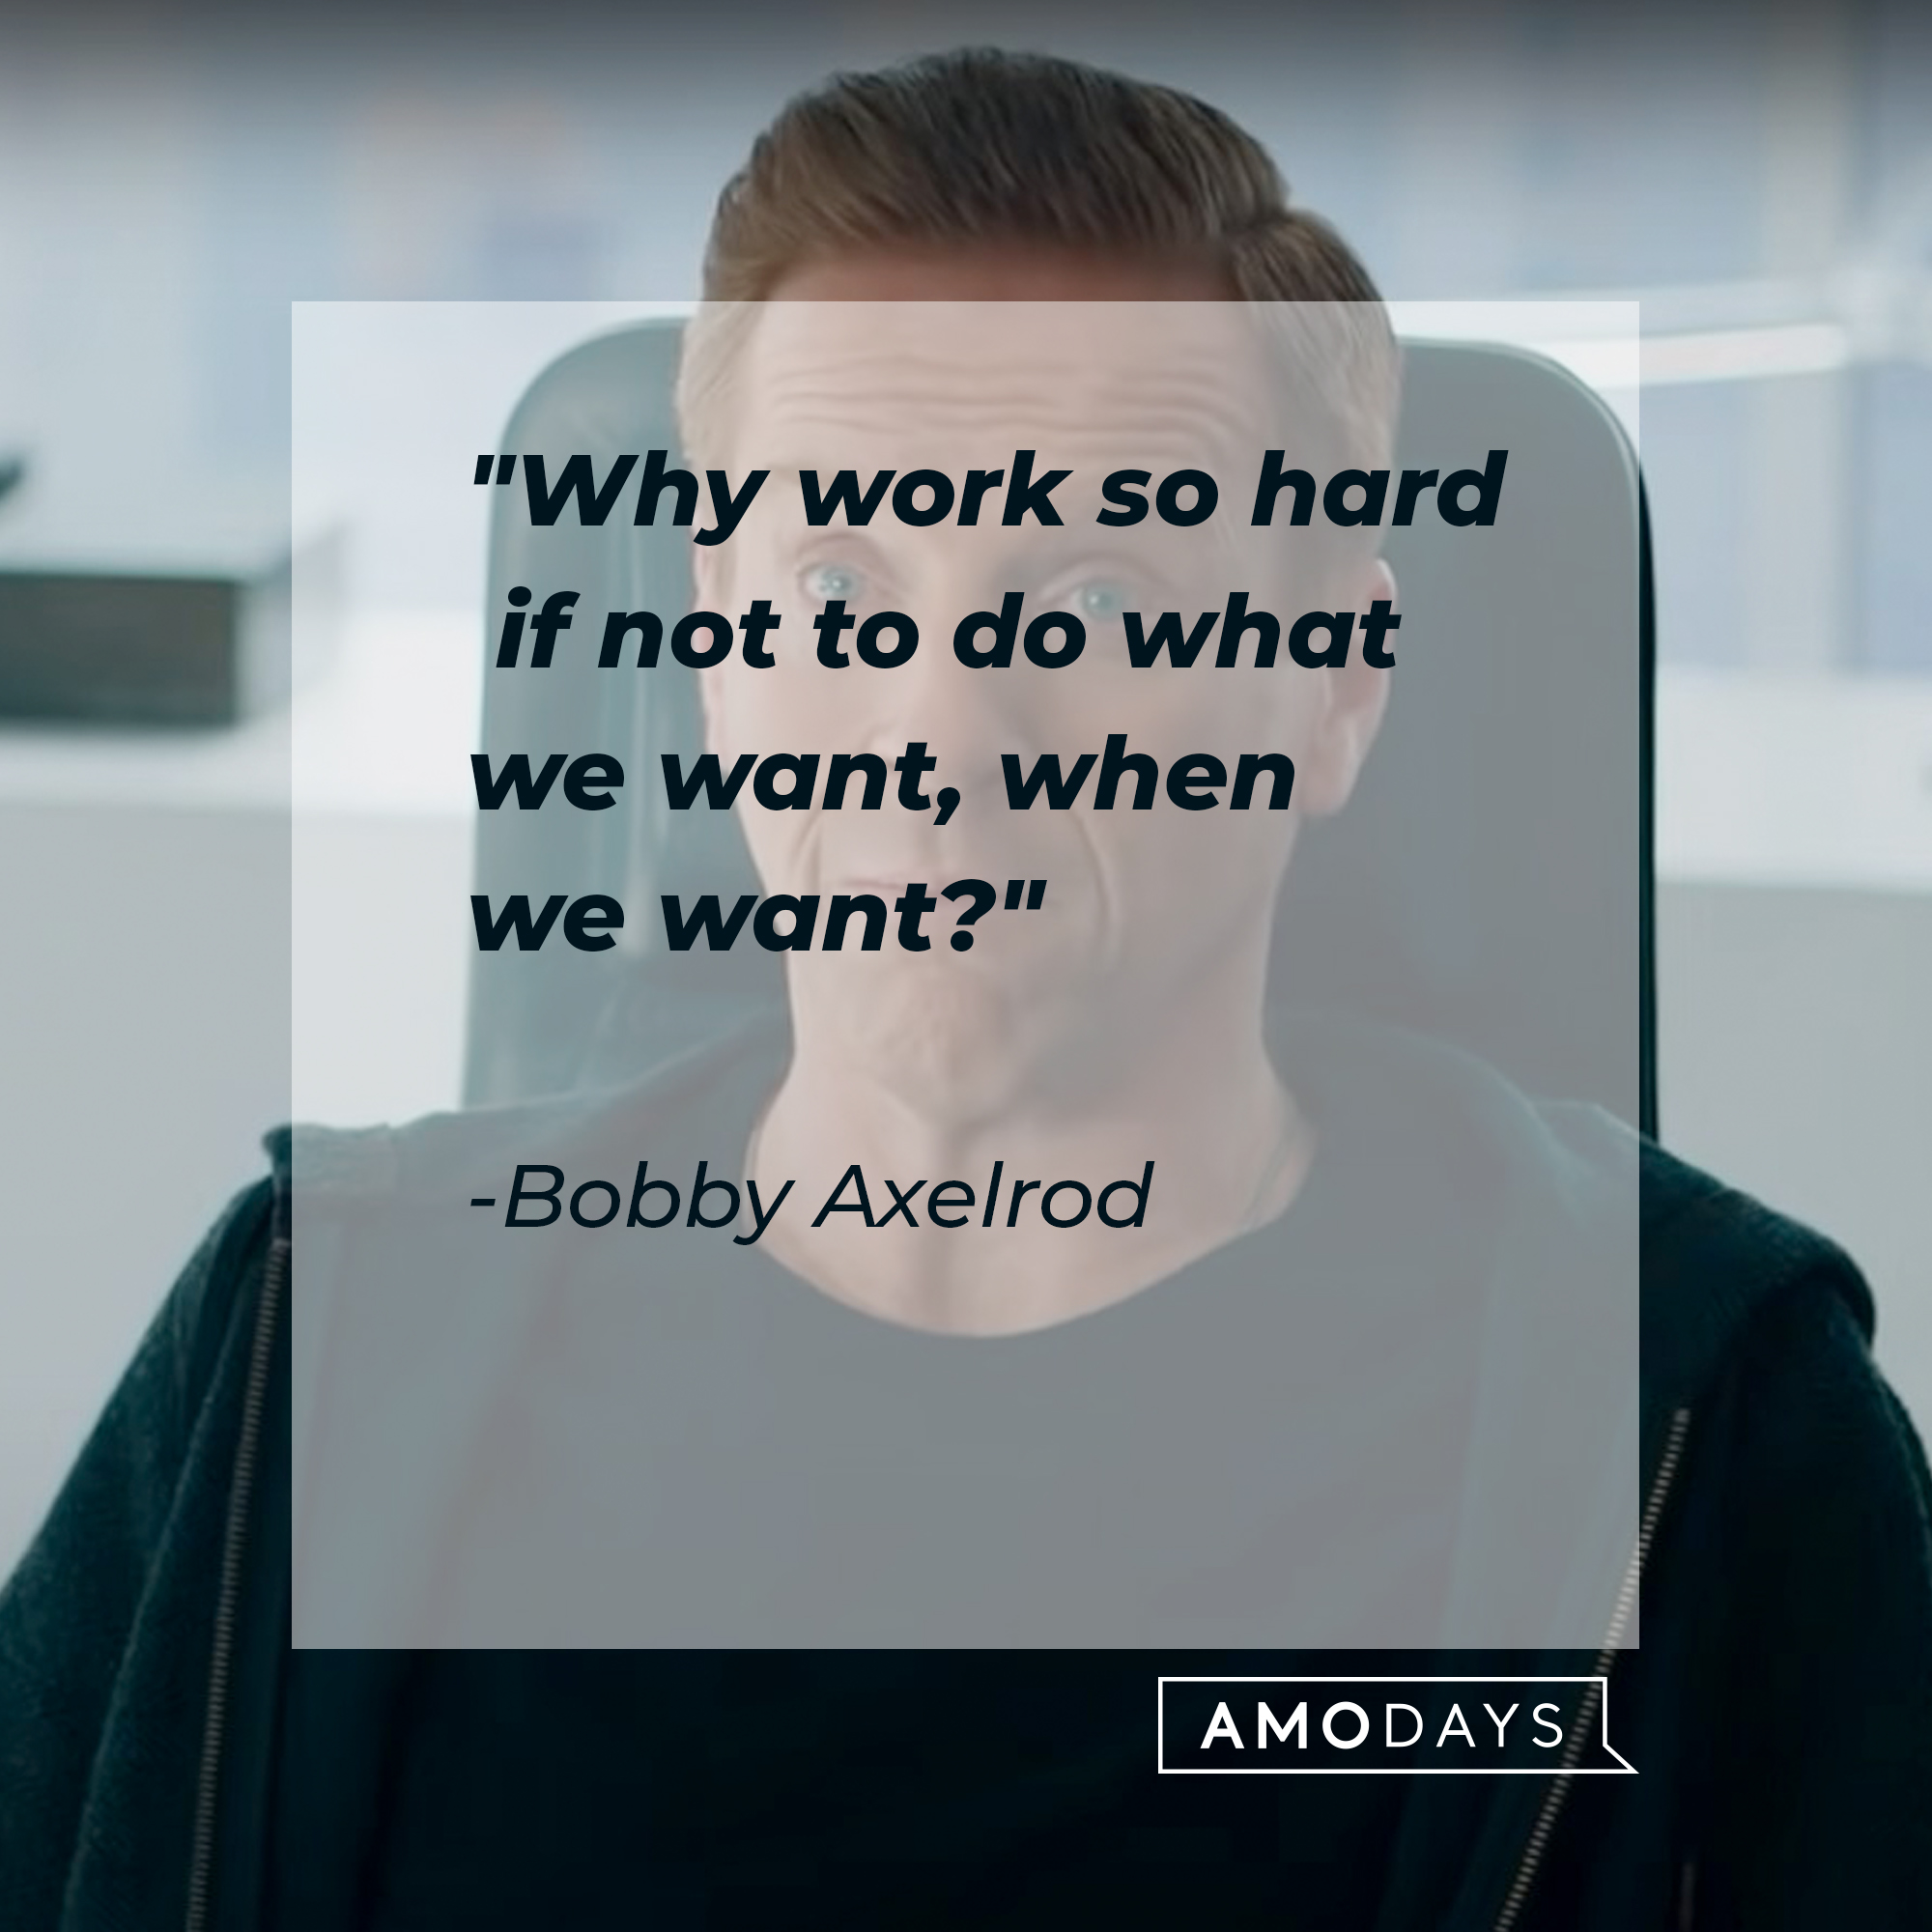 Bobby Axelrod's quote: "Why work so hard if not to do what we want, when we want?" | Source: Youtube.com/BillionsOnShowtime